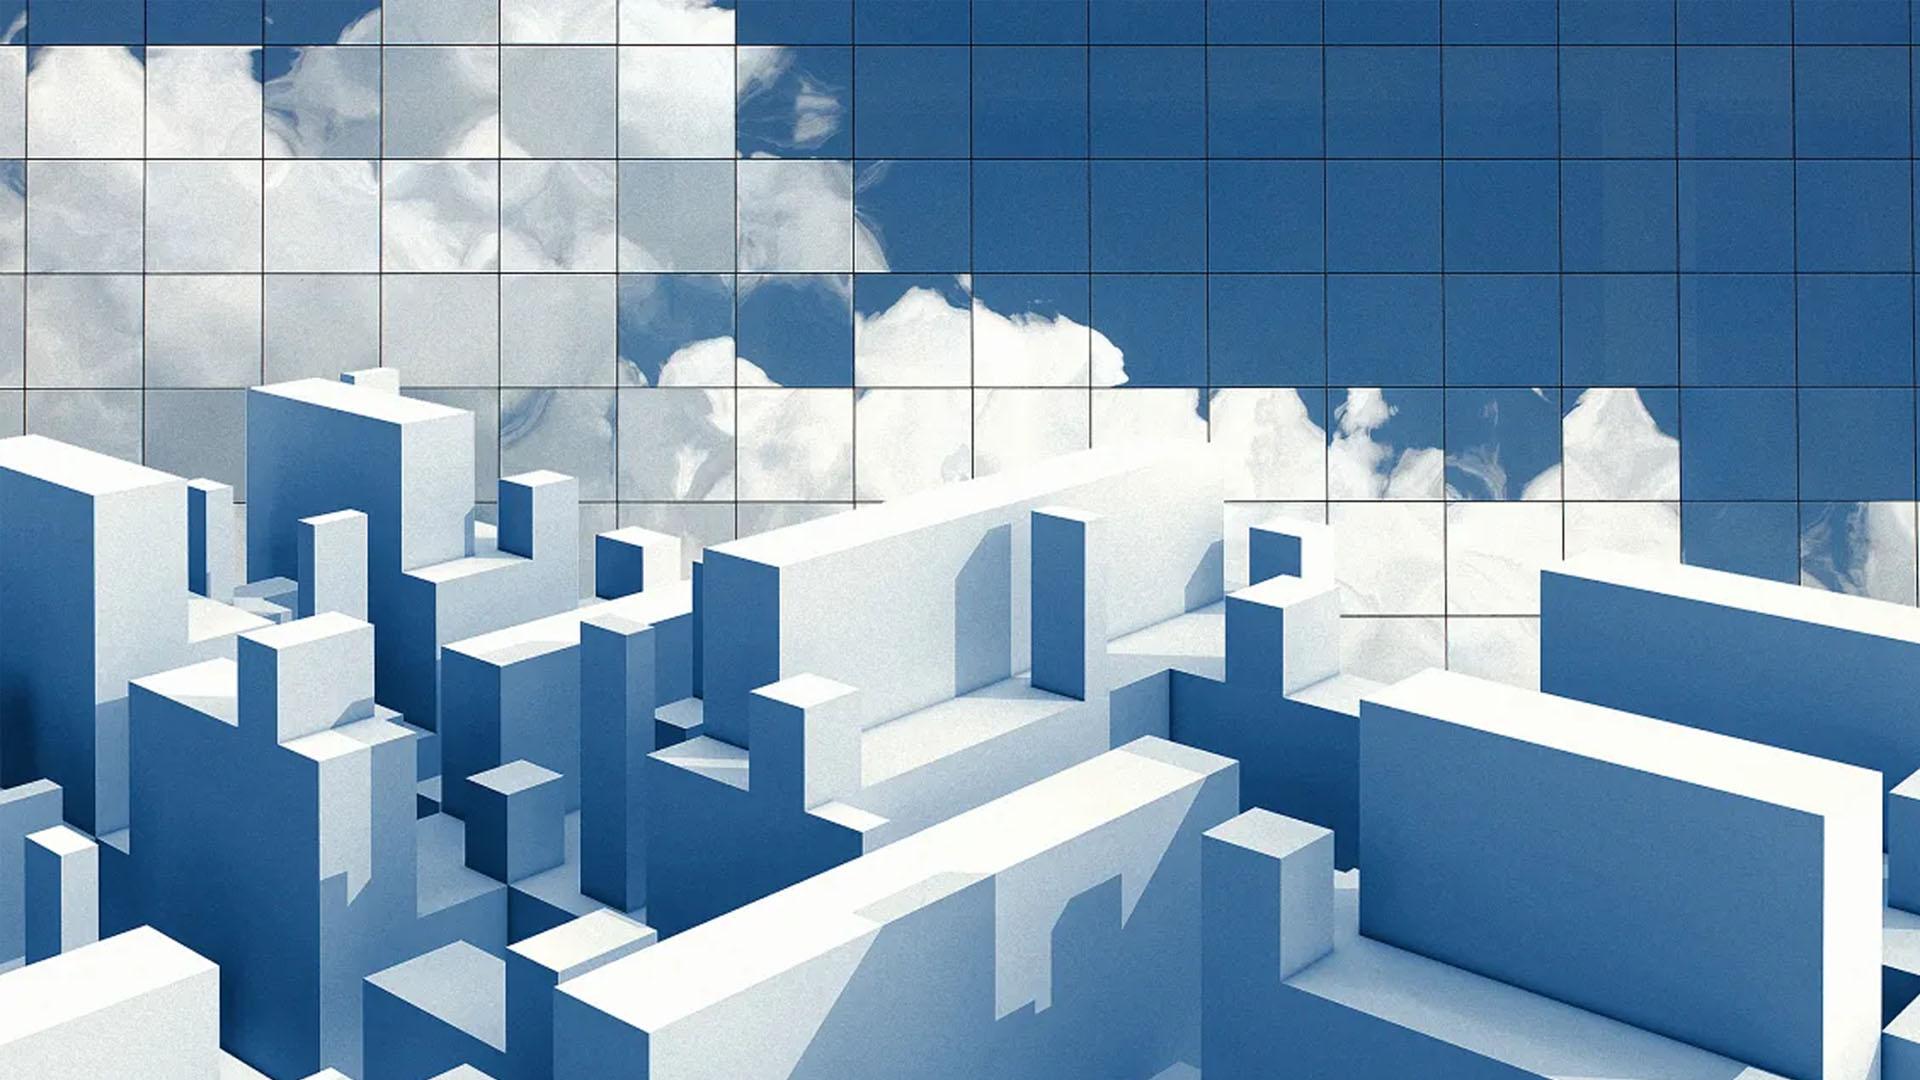 Photo illustration of buildings & clouds